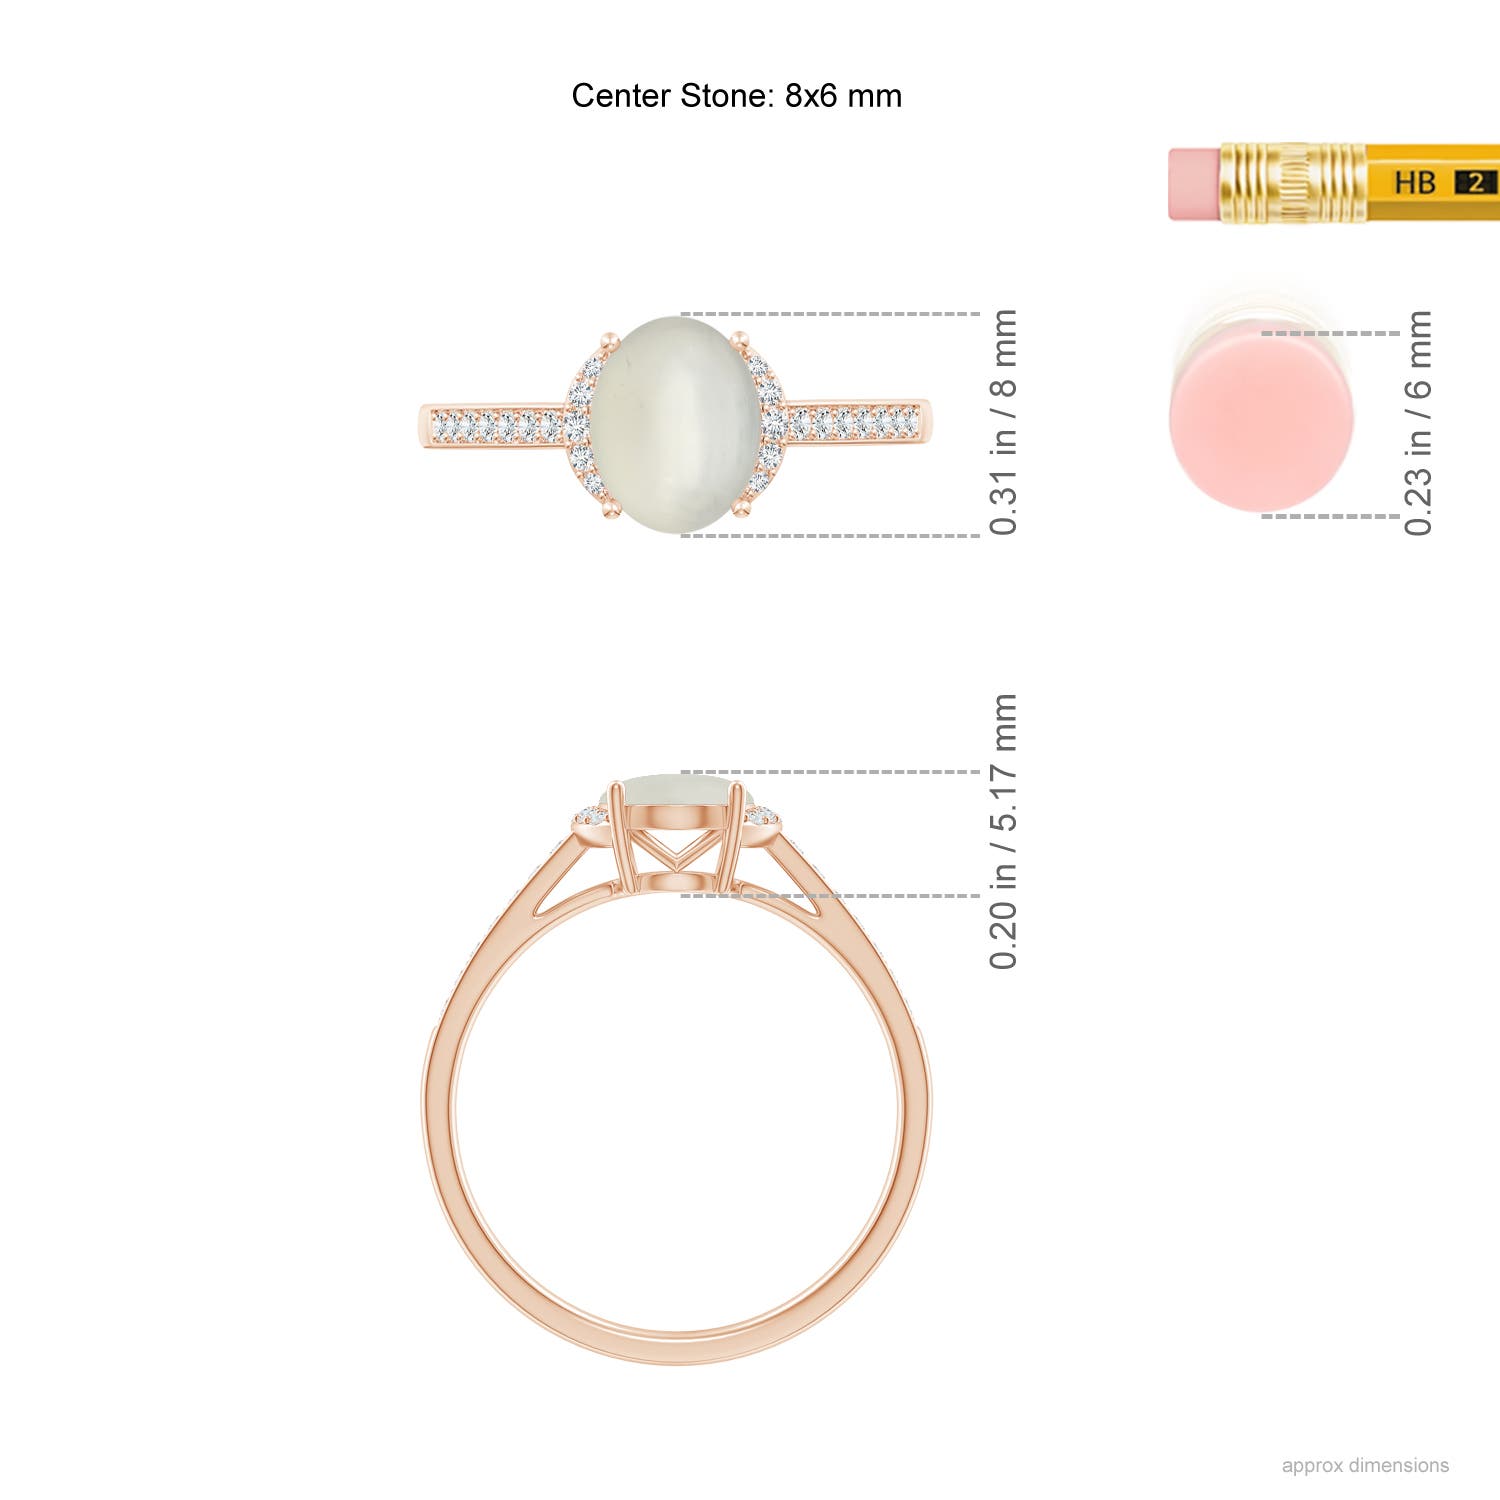 AAA - Moonstone / 1.23 CT / 14 KT Rose Gold